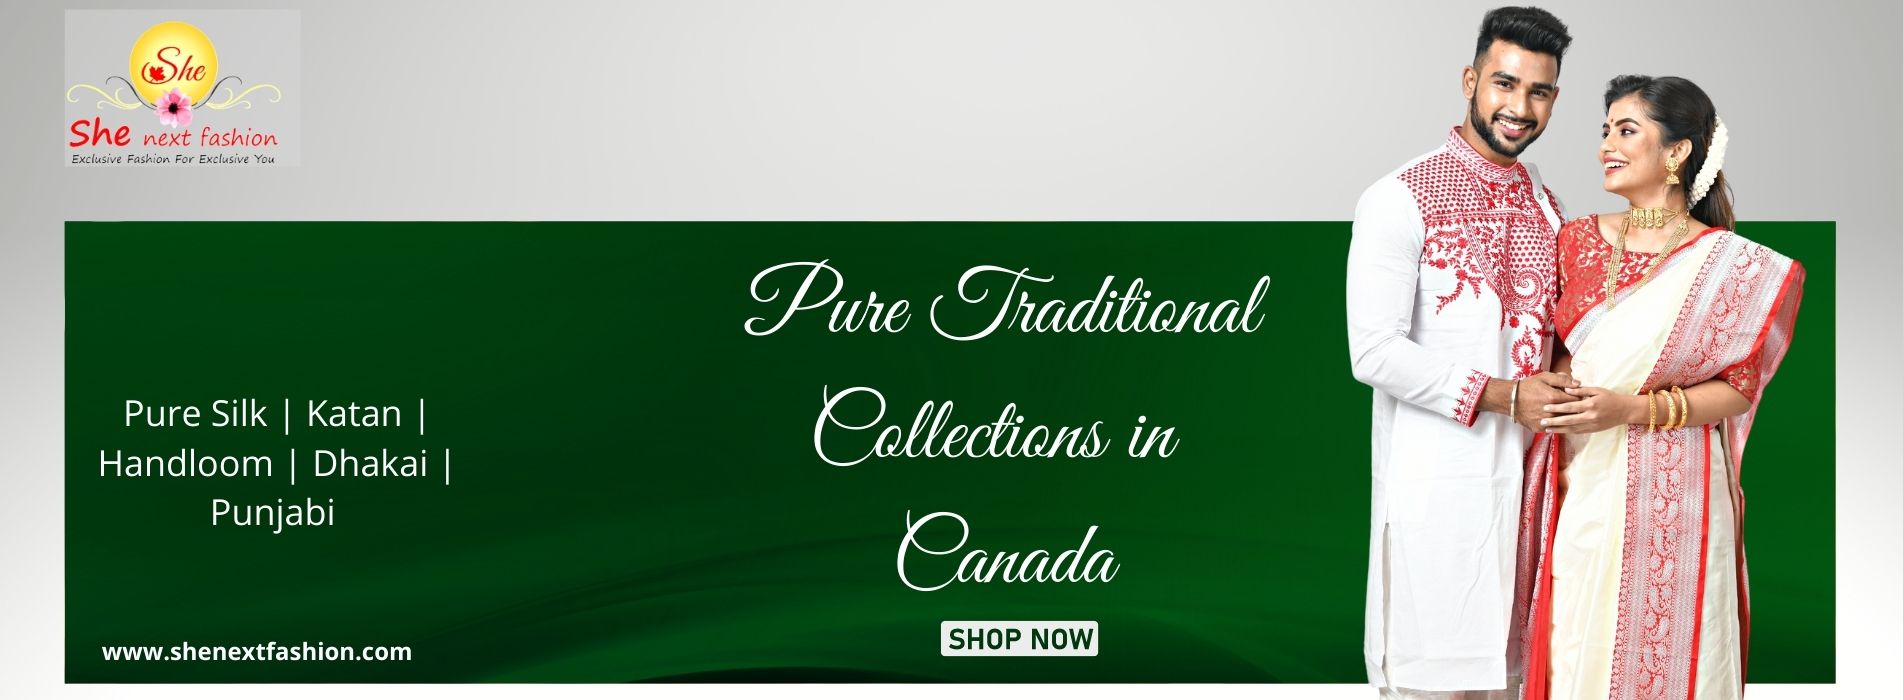 Traditional Collections in Canada